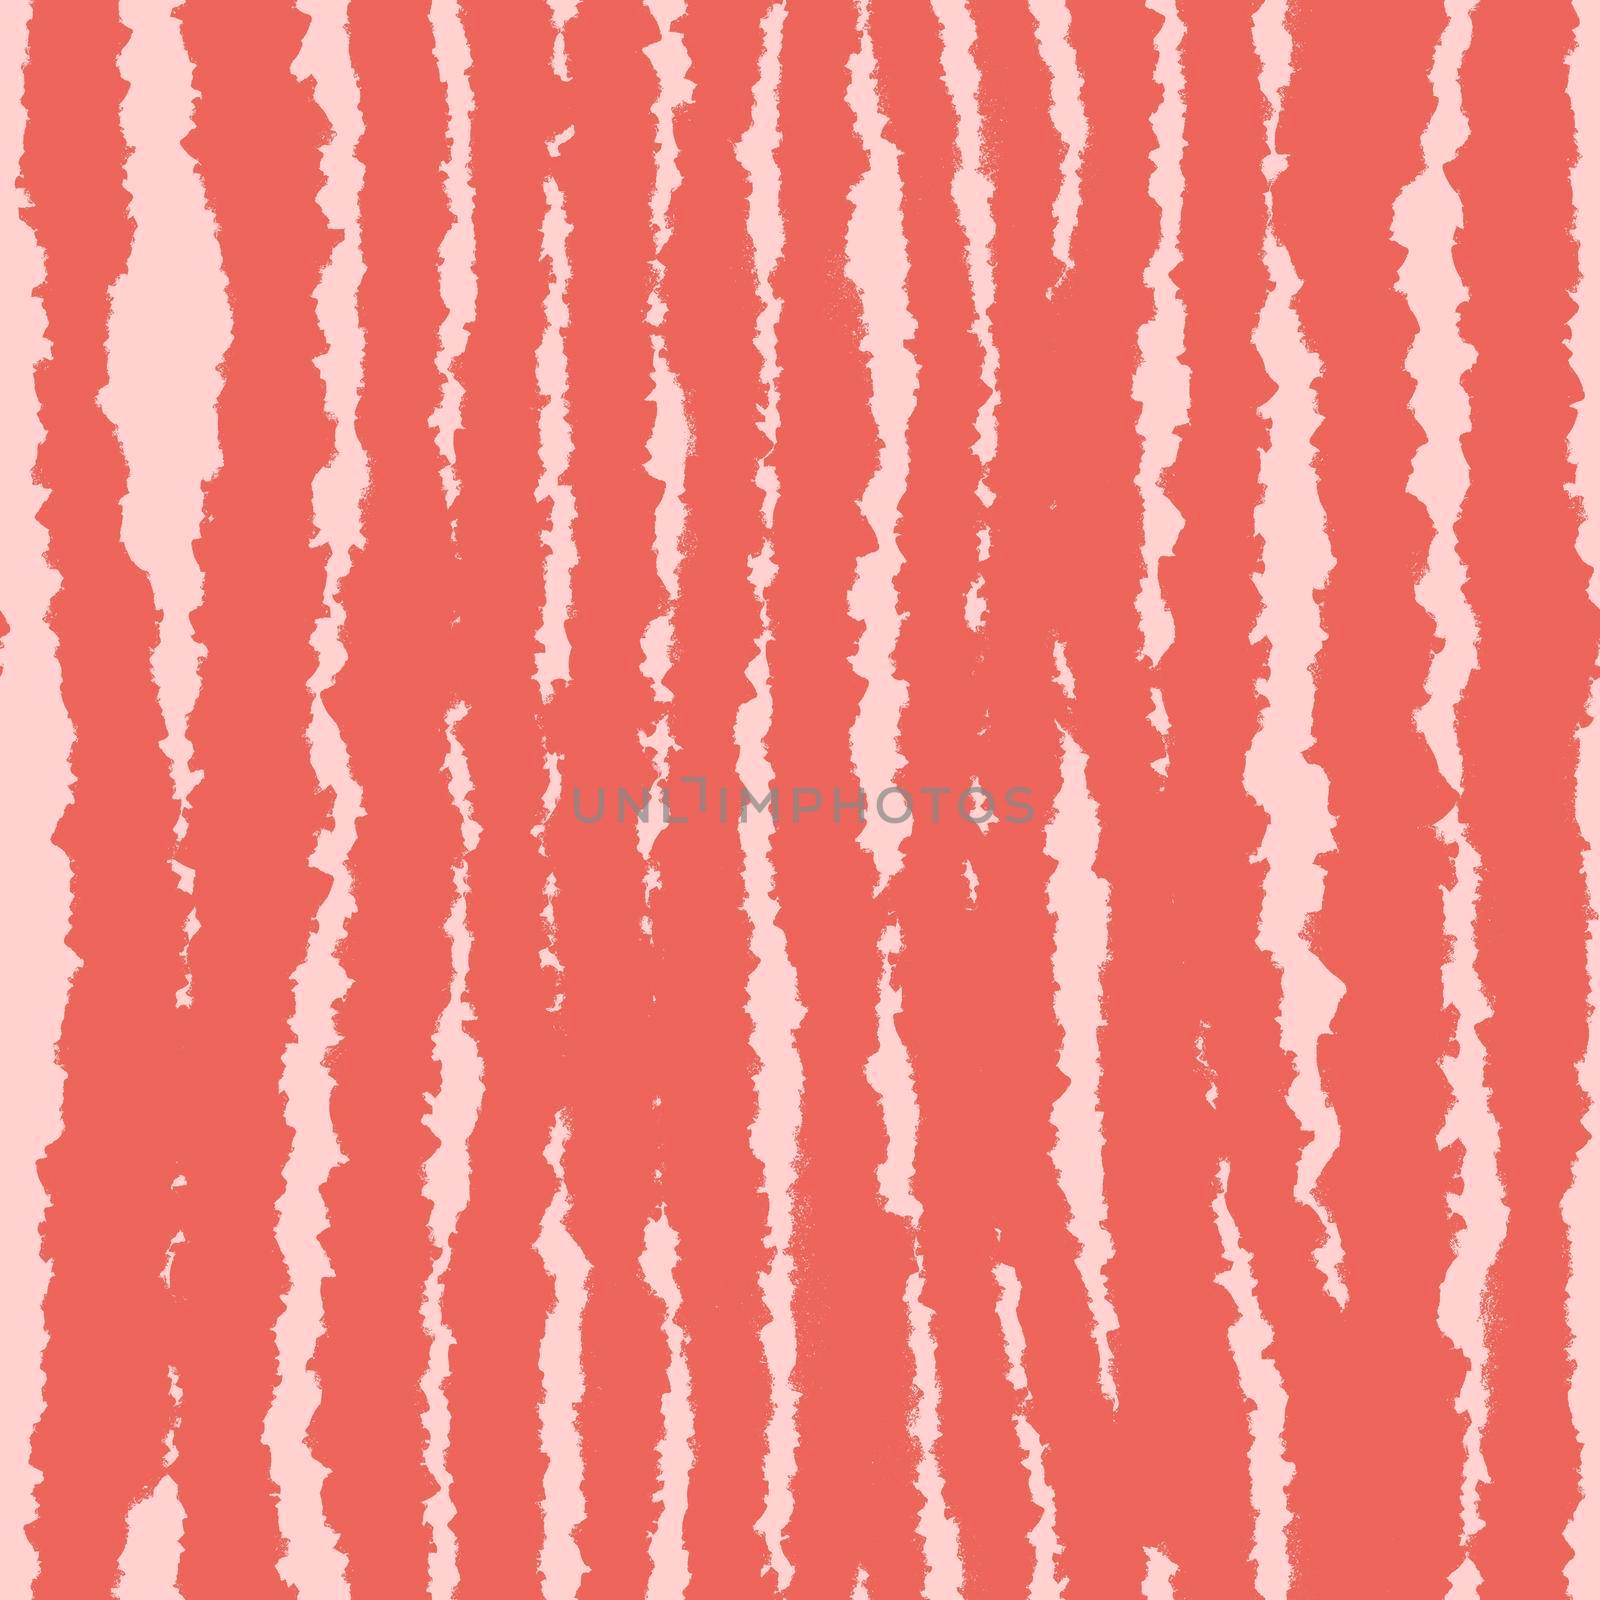 Hand drawn seamless pattern with stripes lines geometric abstract shapes in red orange yellow colors. Mid century modern background for fabric print wallpaper wrapping paper. Contemporary trendy fluid design